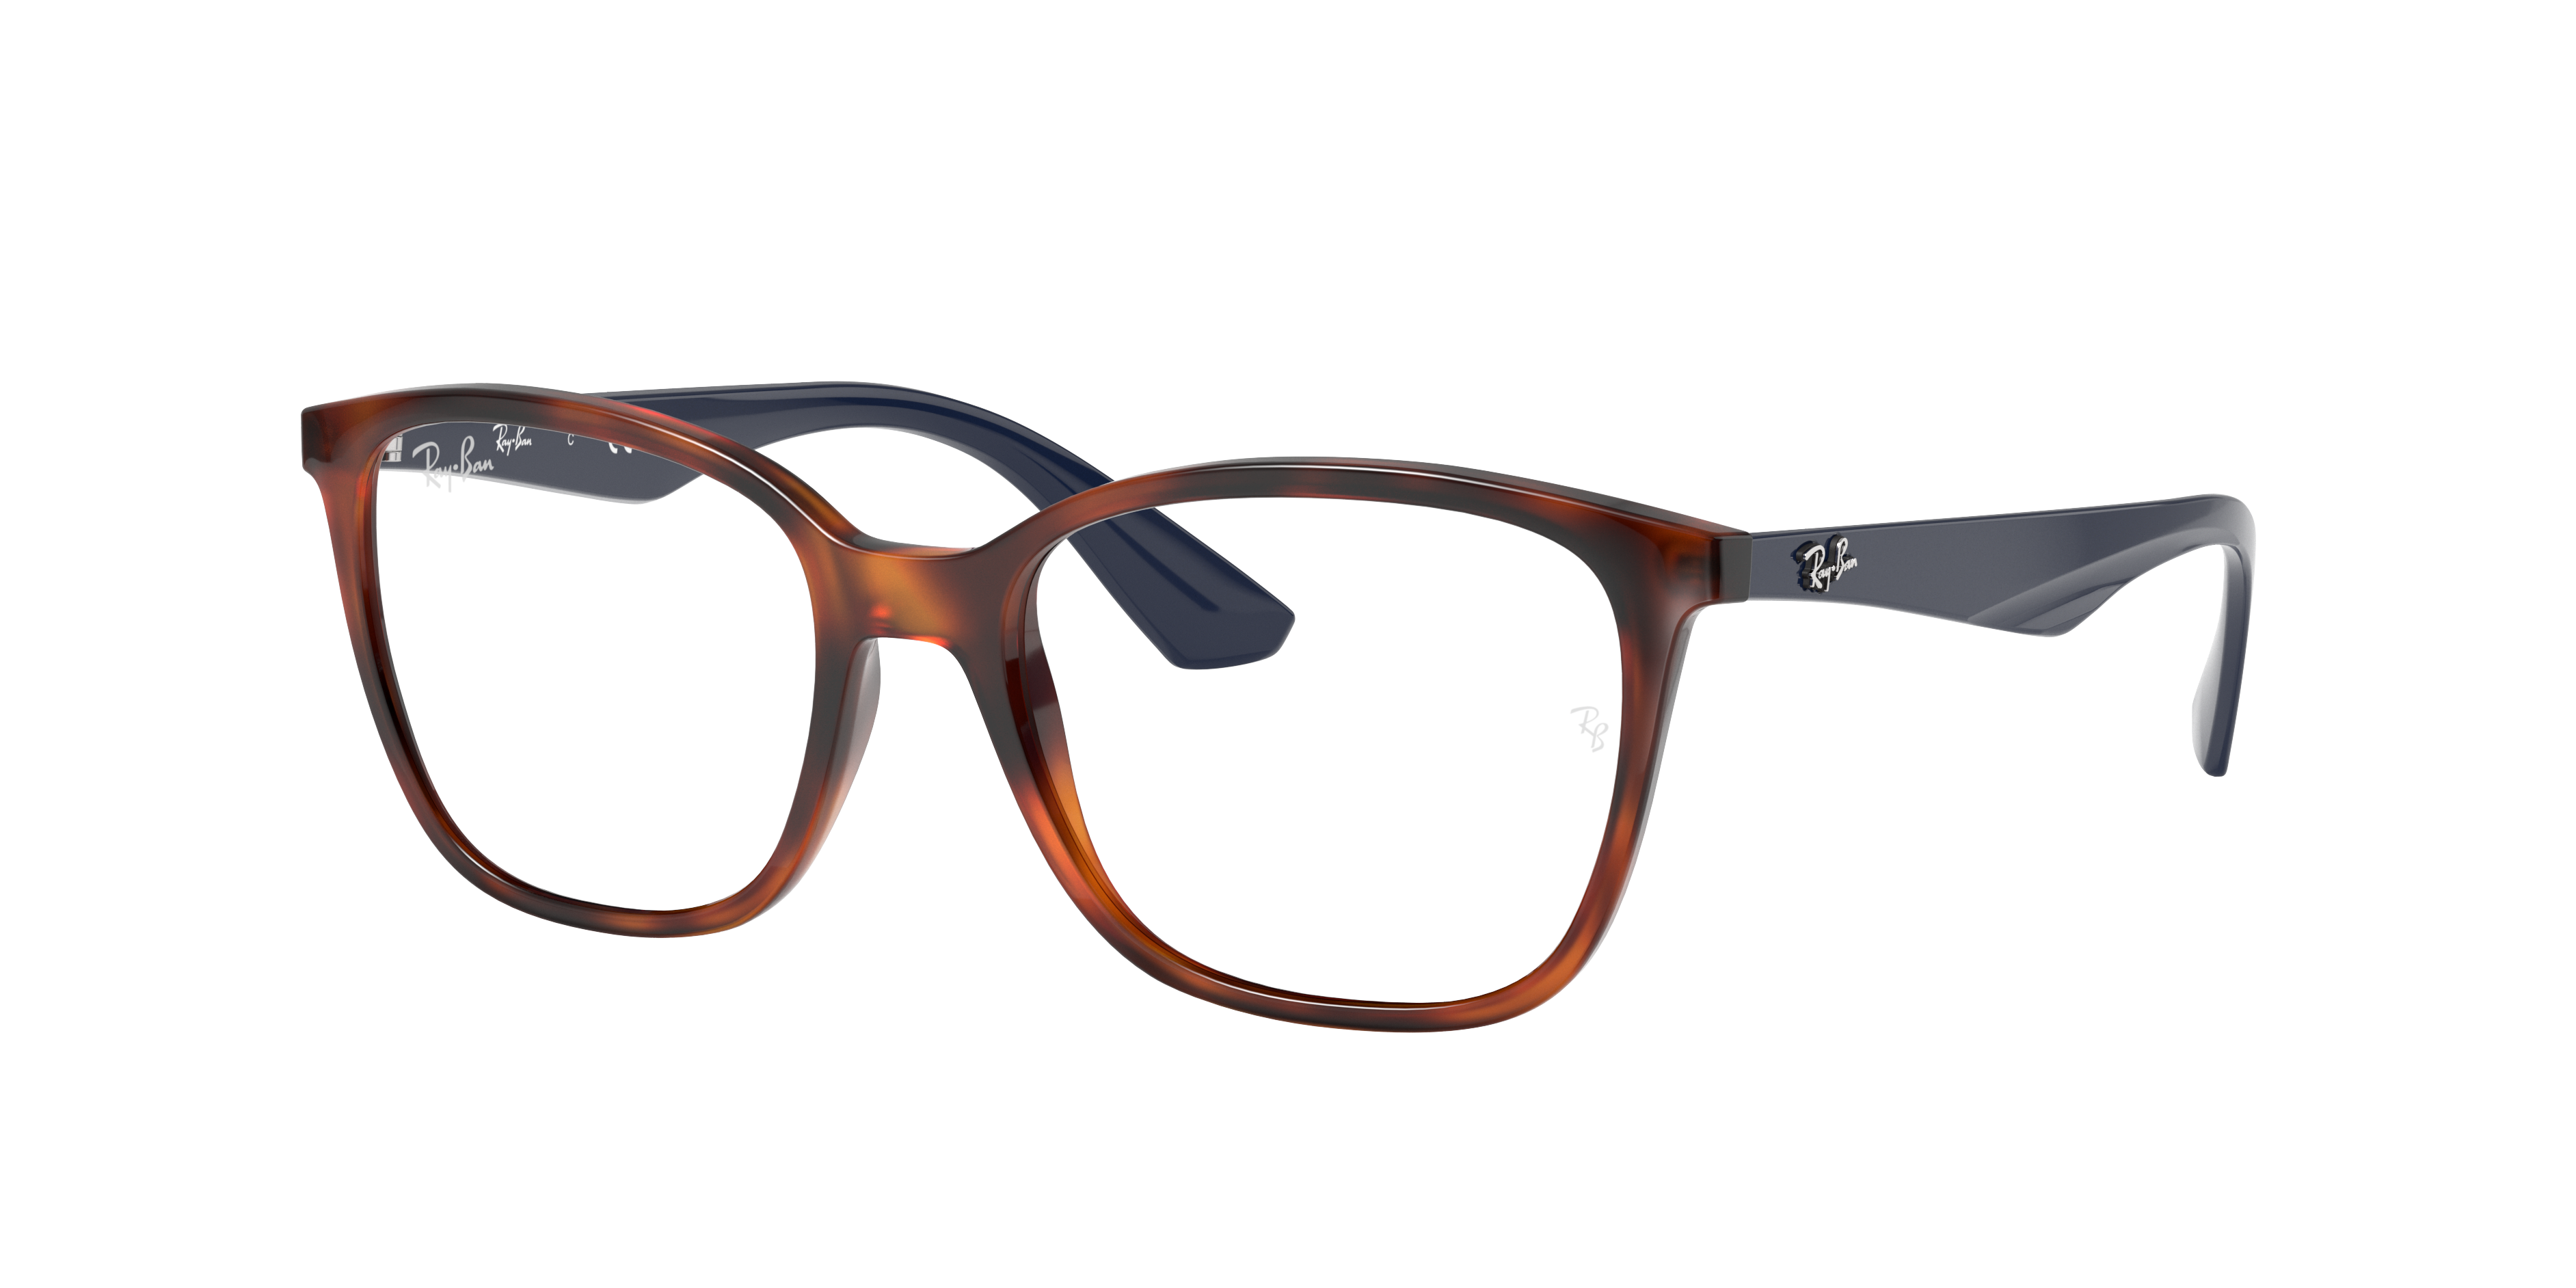 lenscrafters ray ban lenses